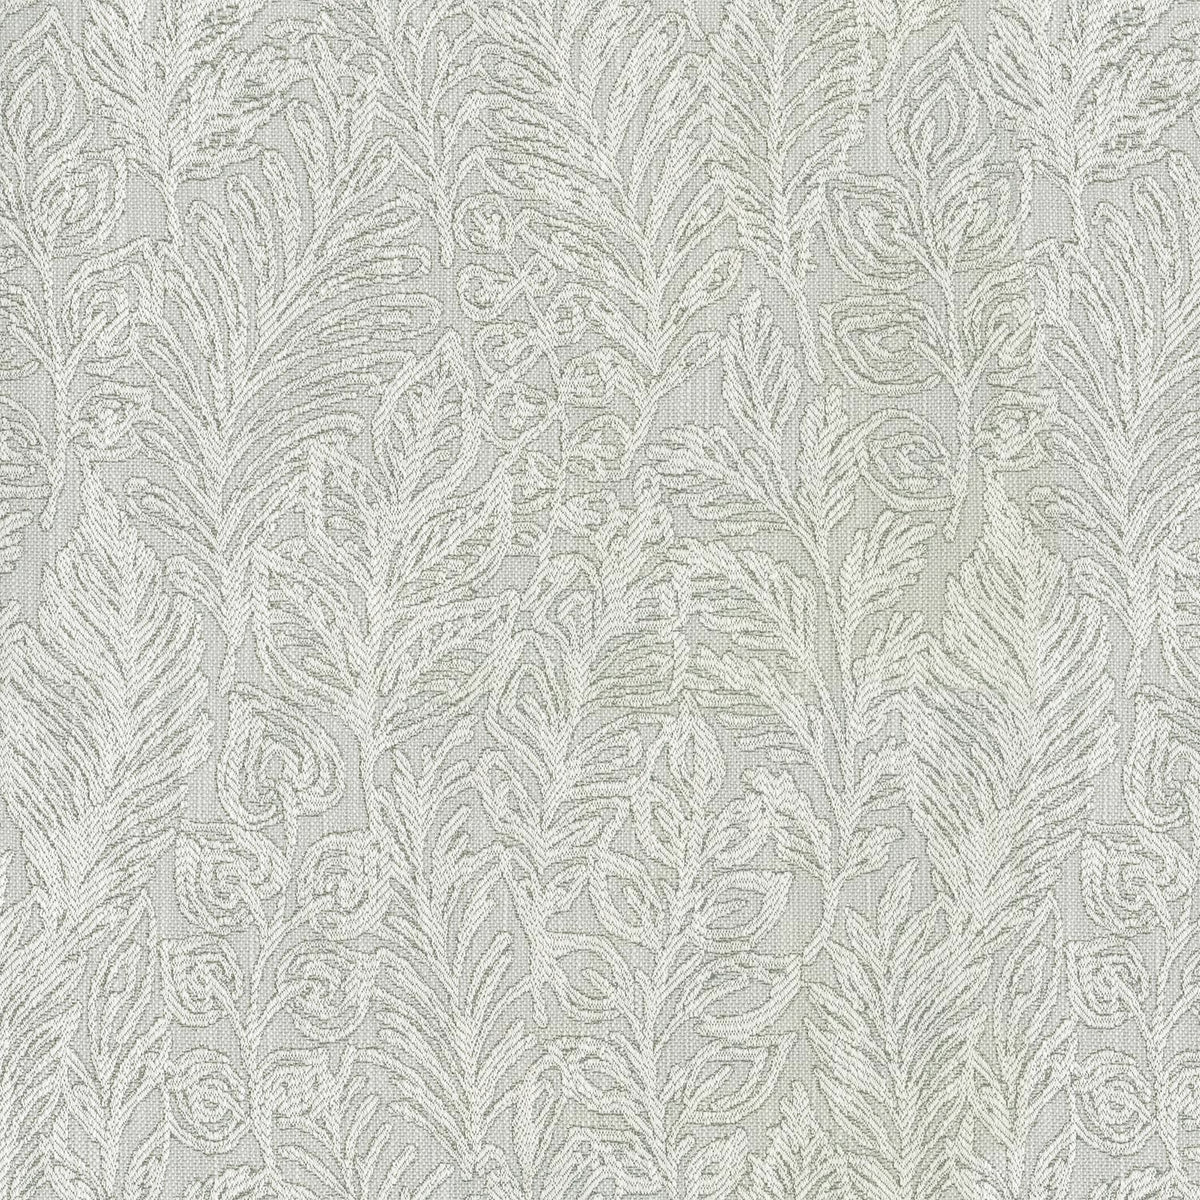 P/K Lifestyles Climbing Leaves - Frost 410222 Upholstery Fabric